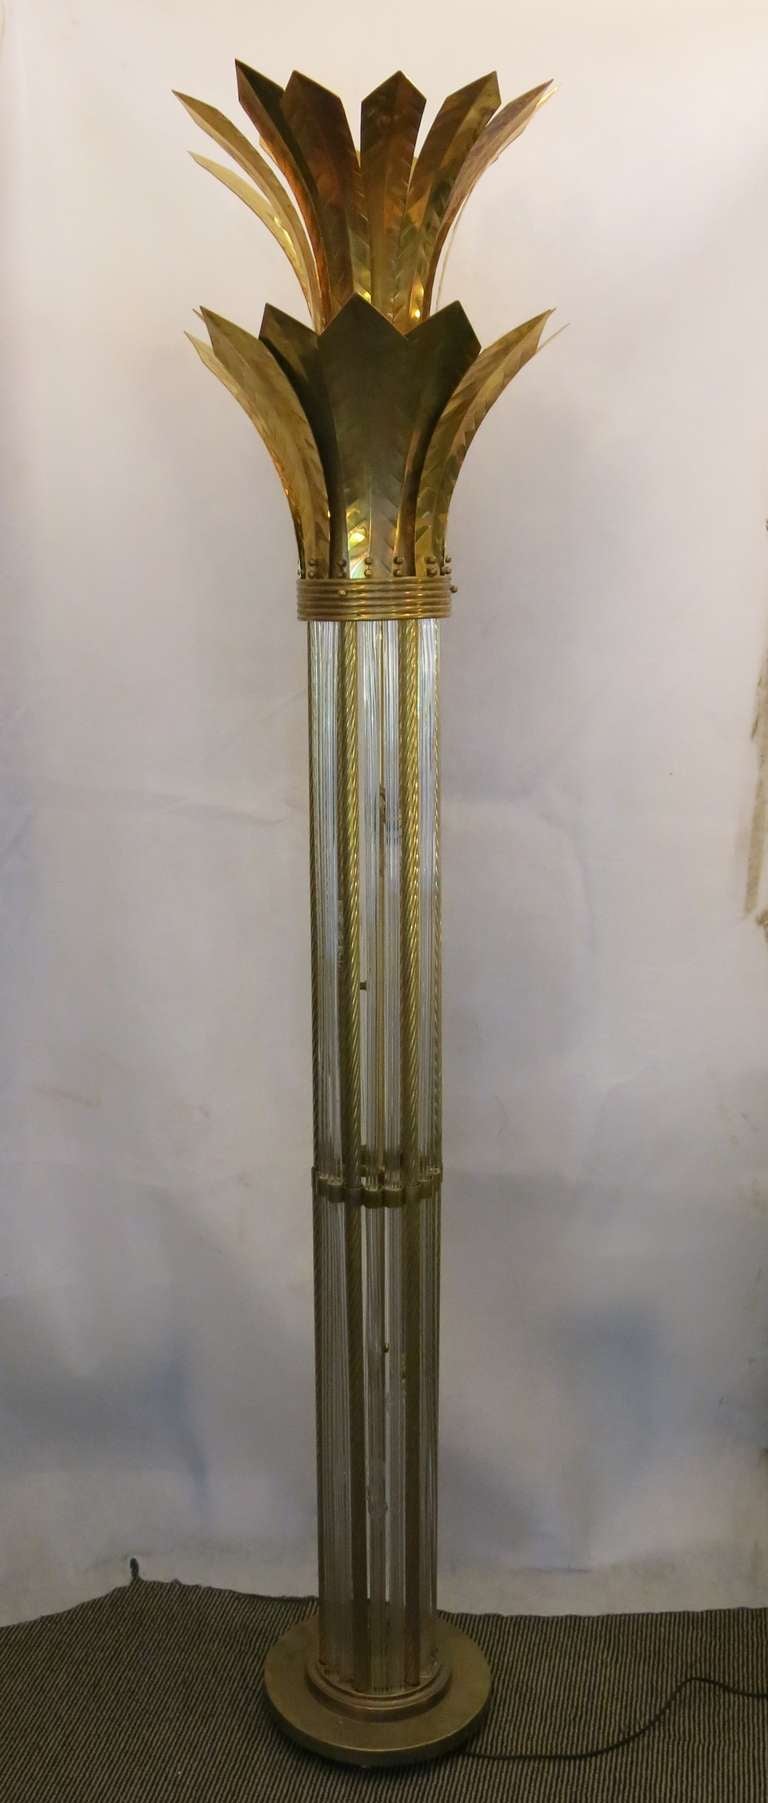 Particular floor lamp in Murano glass and brass. Very tall and important. Piece truly unique. Will light both above and within the body.